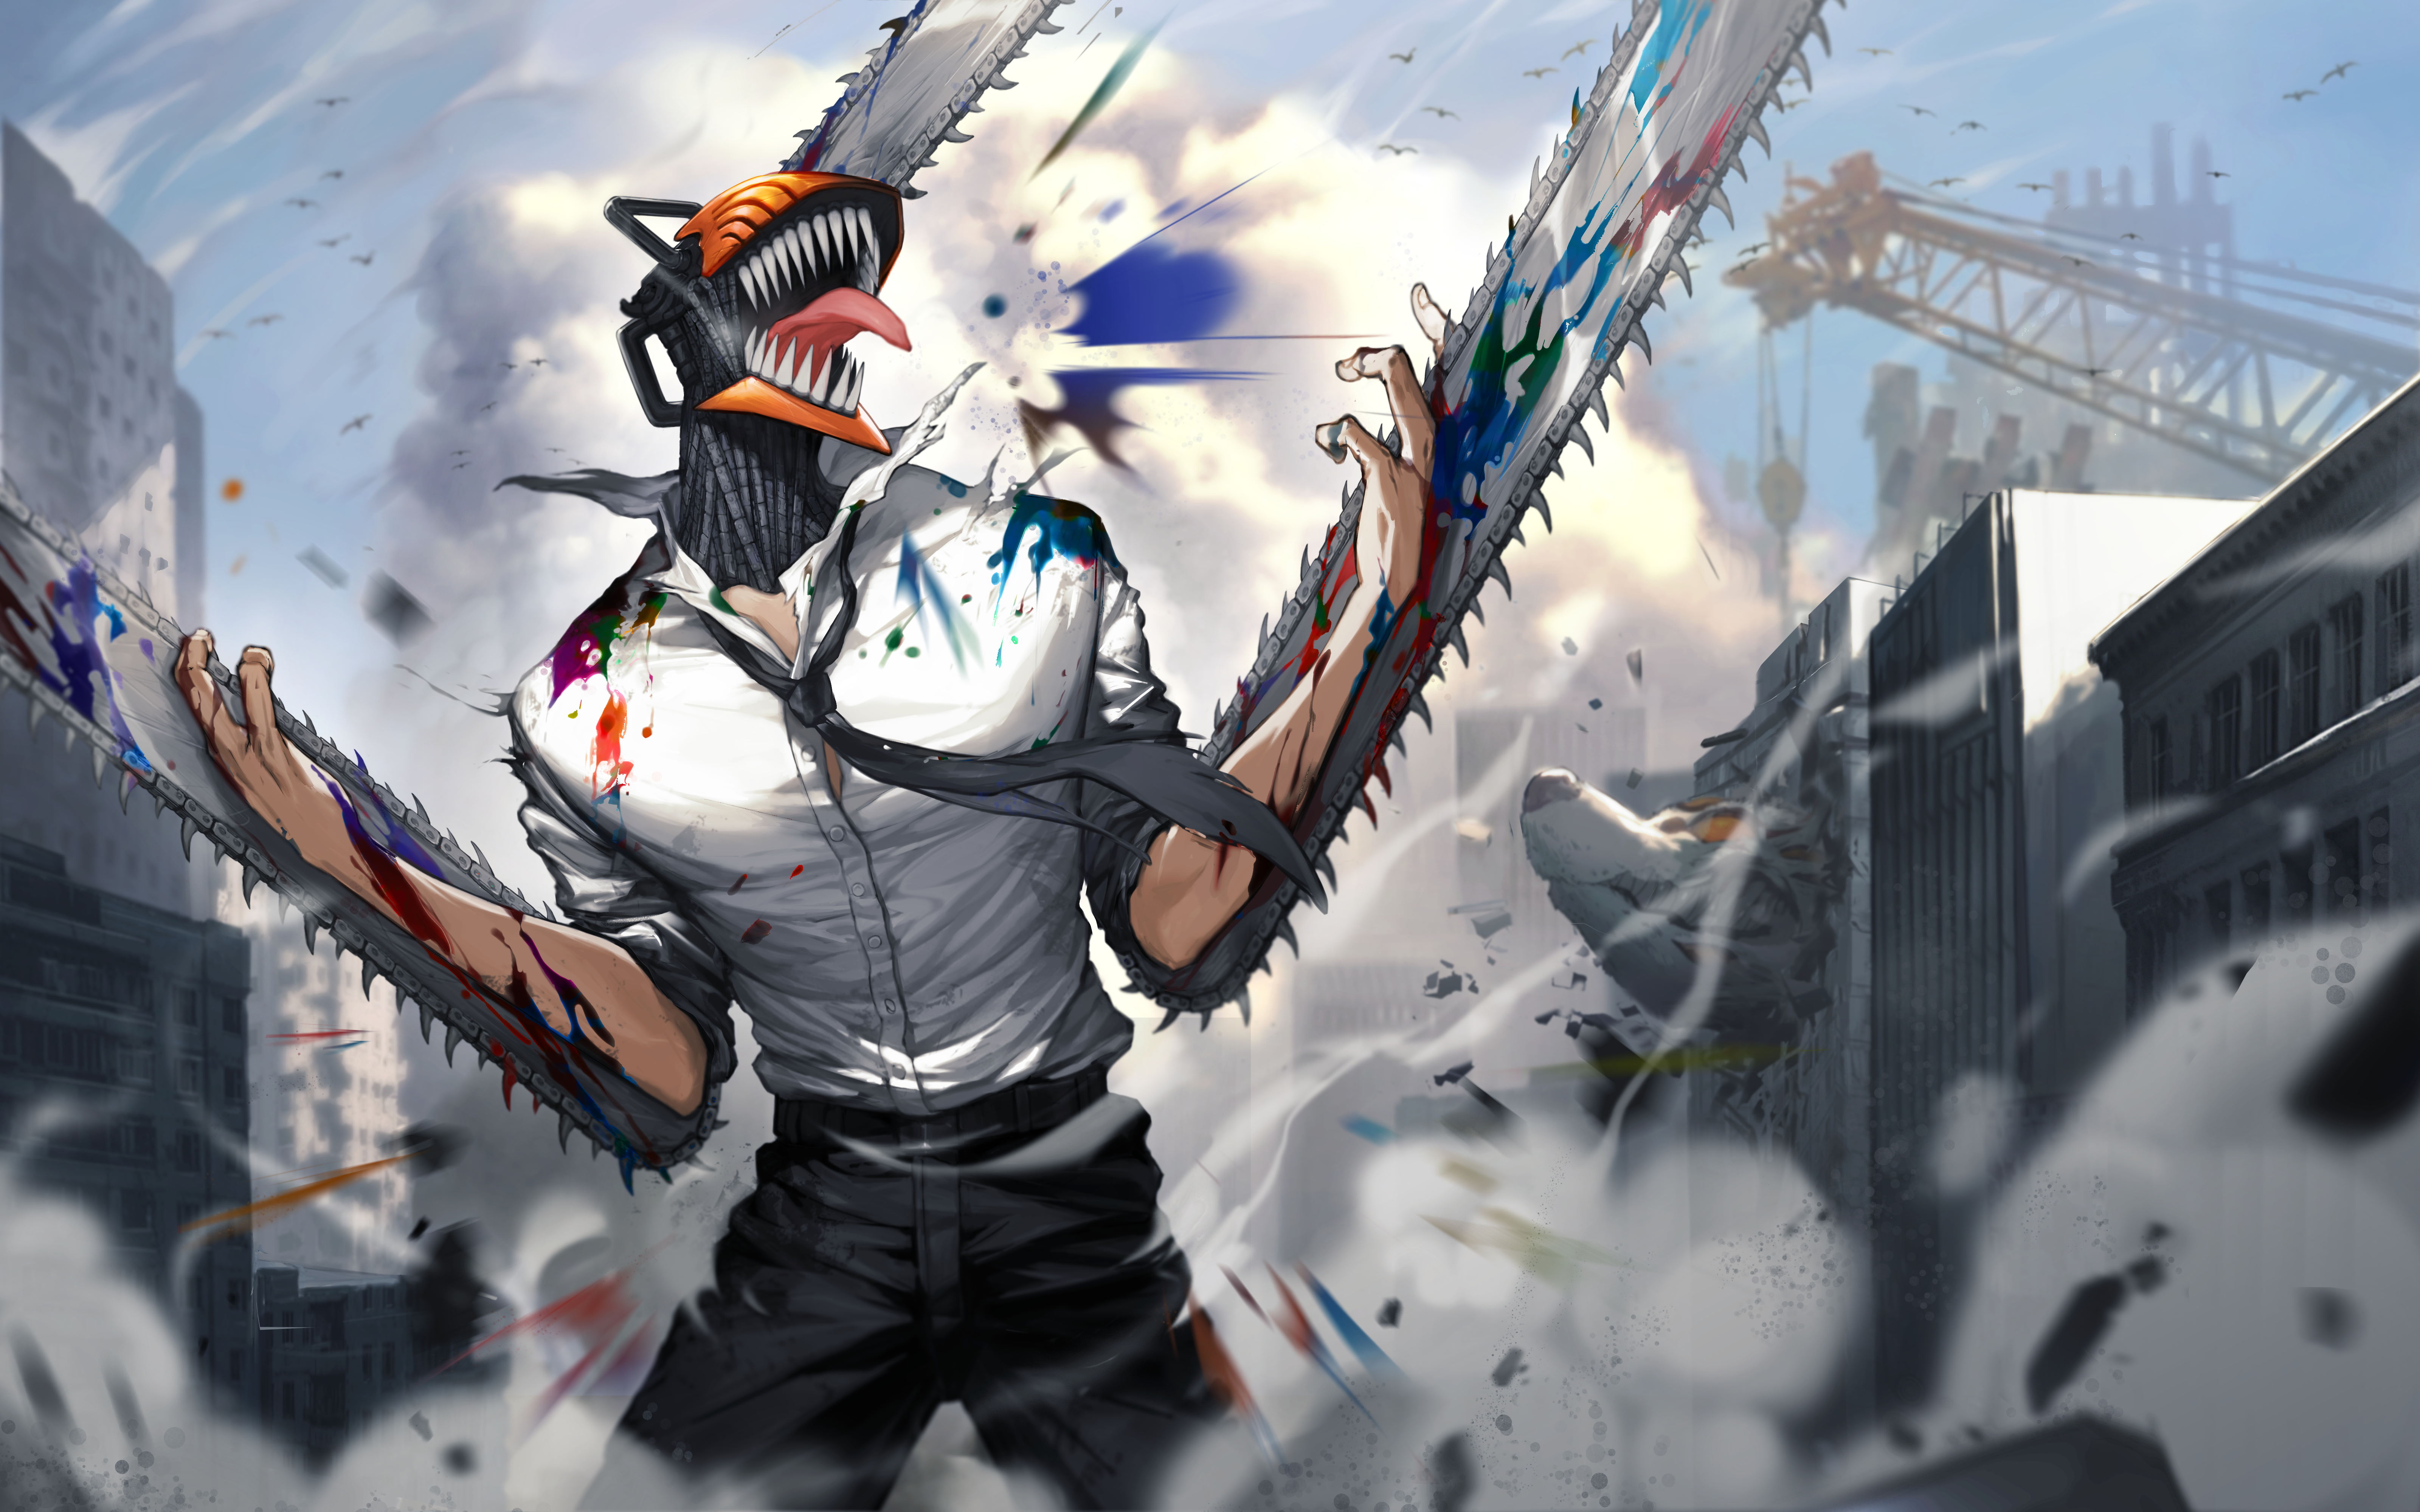 440+ Denji (Chainsaw Man) HD Wallpapers and Backgrounds